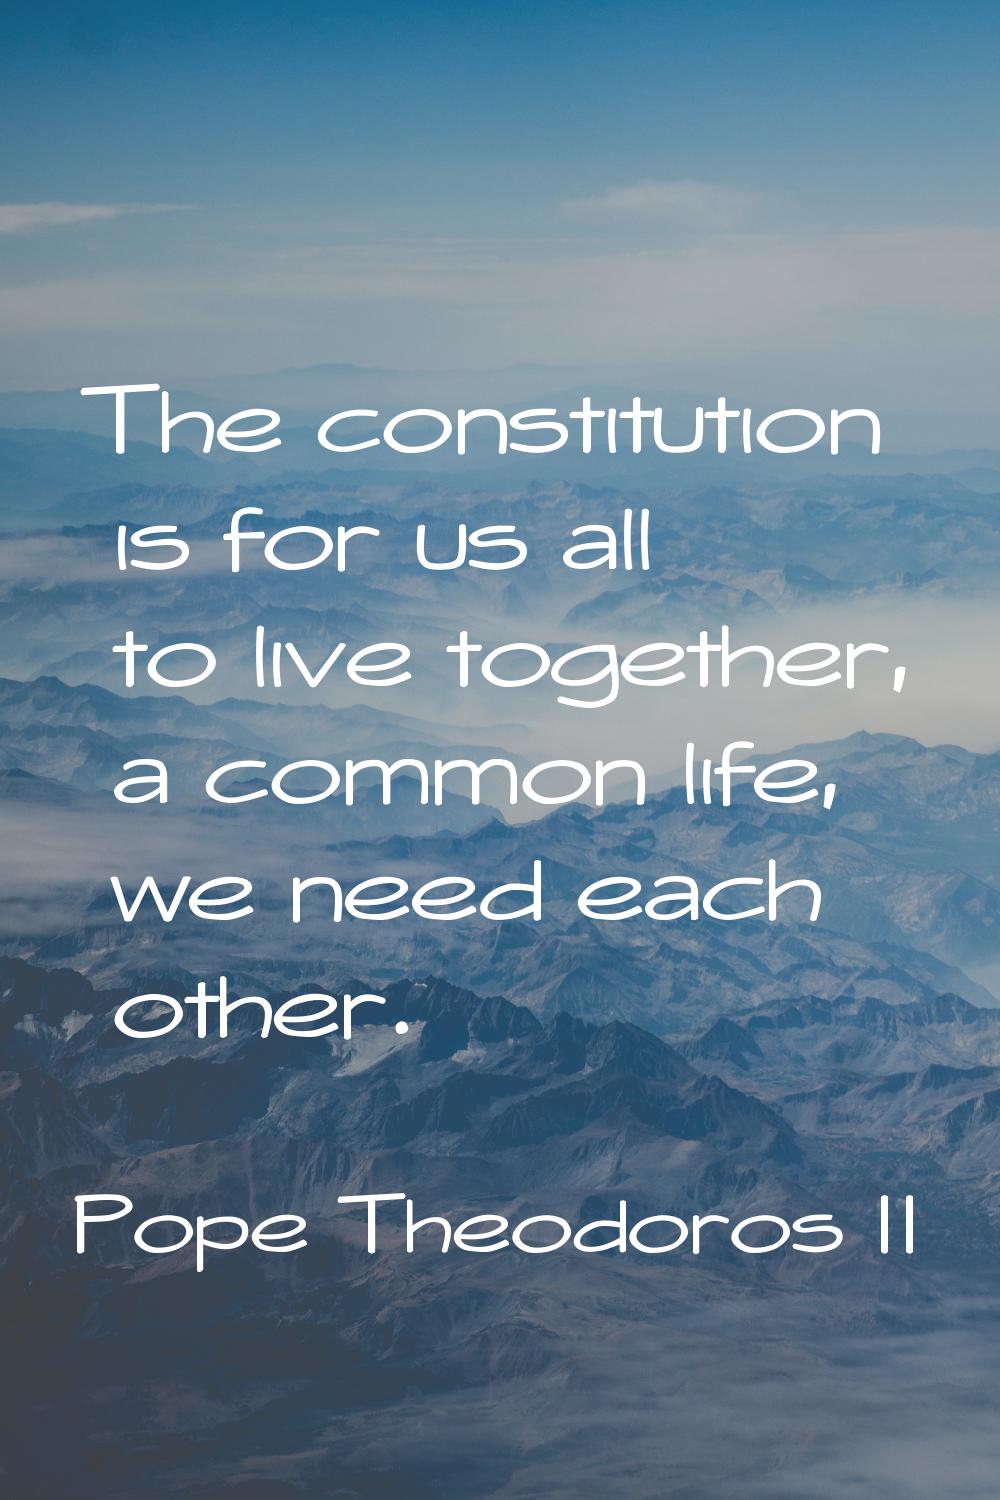 The constitution is for us all to live together, a common life, we need each other.